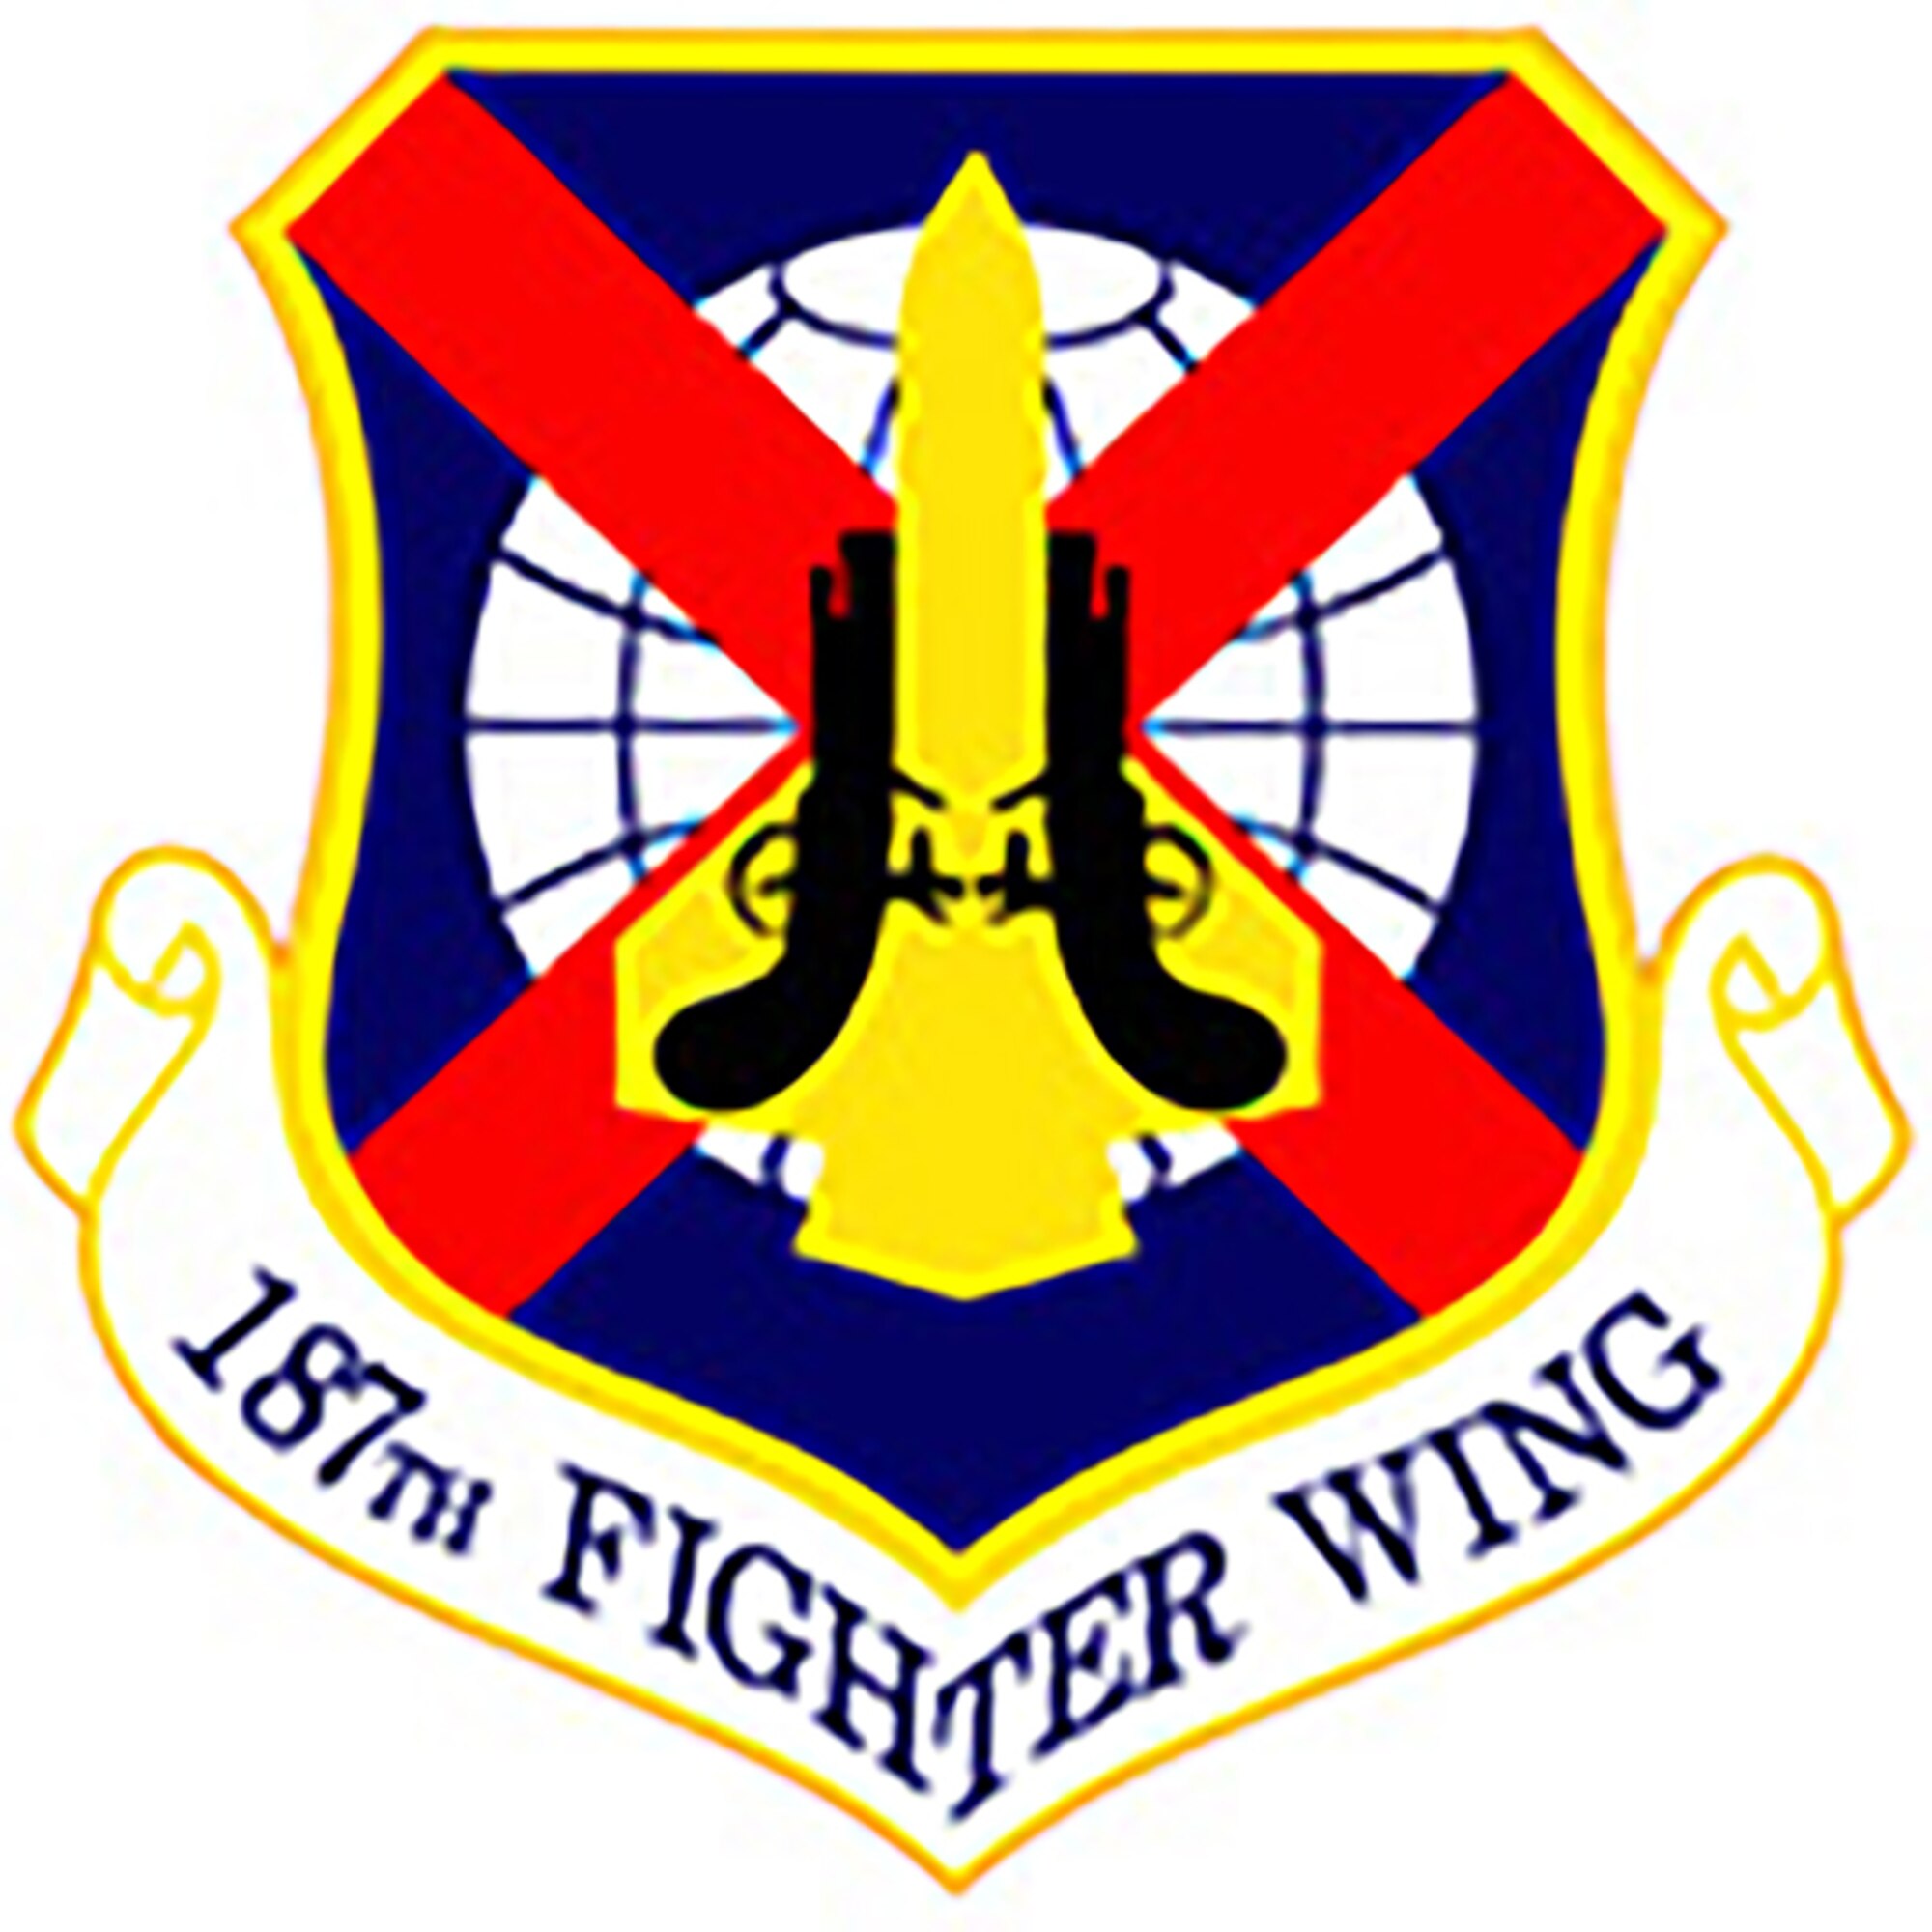 The 187th Fighter Wing participated in a combat exercise Nov. 1-6 throughout the southeast United States.